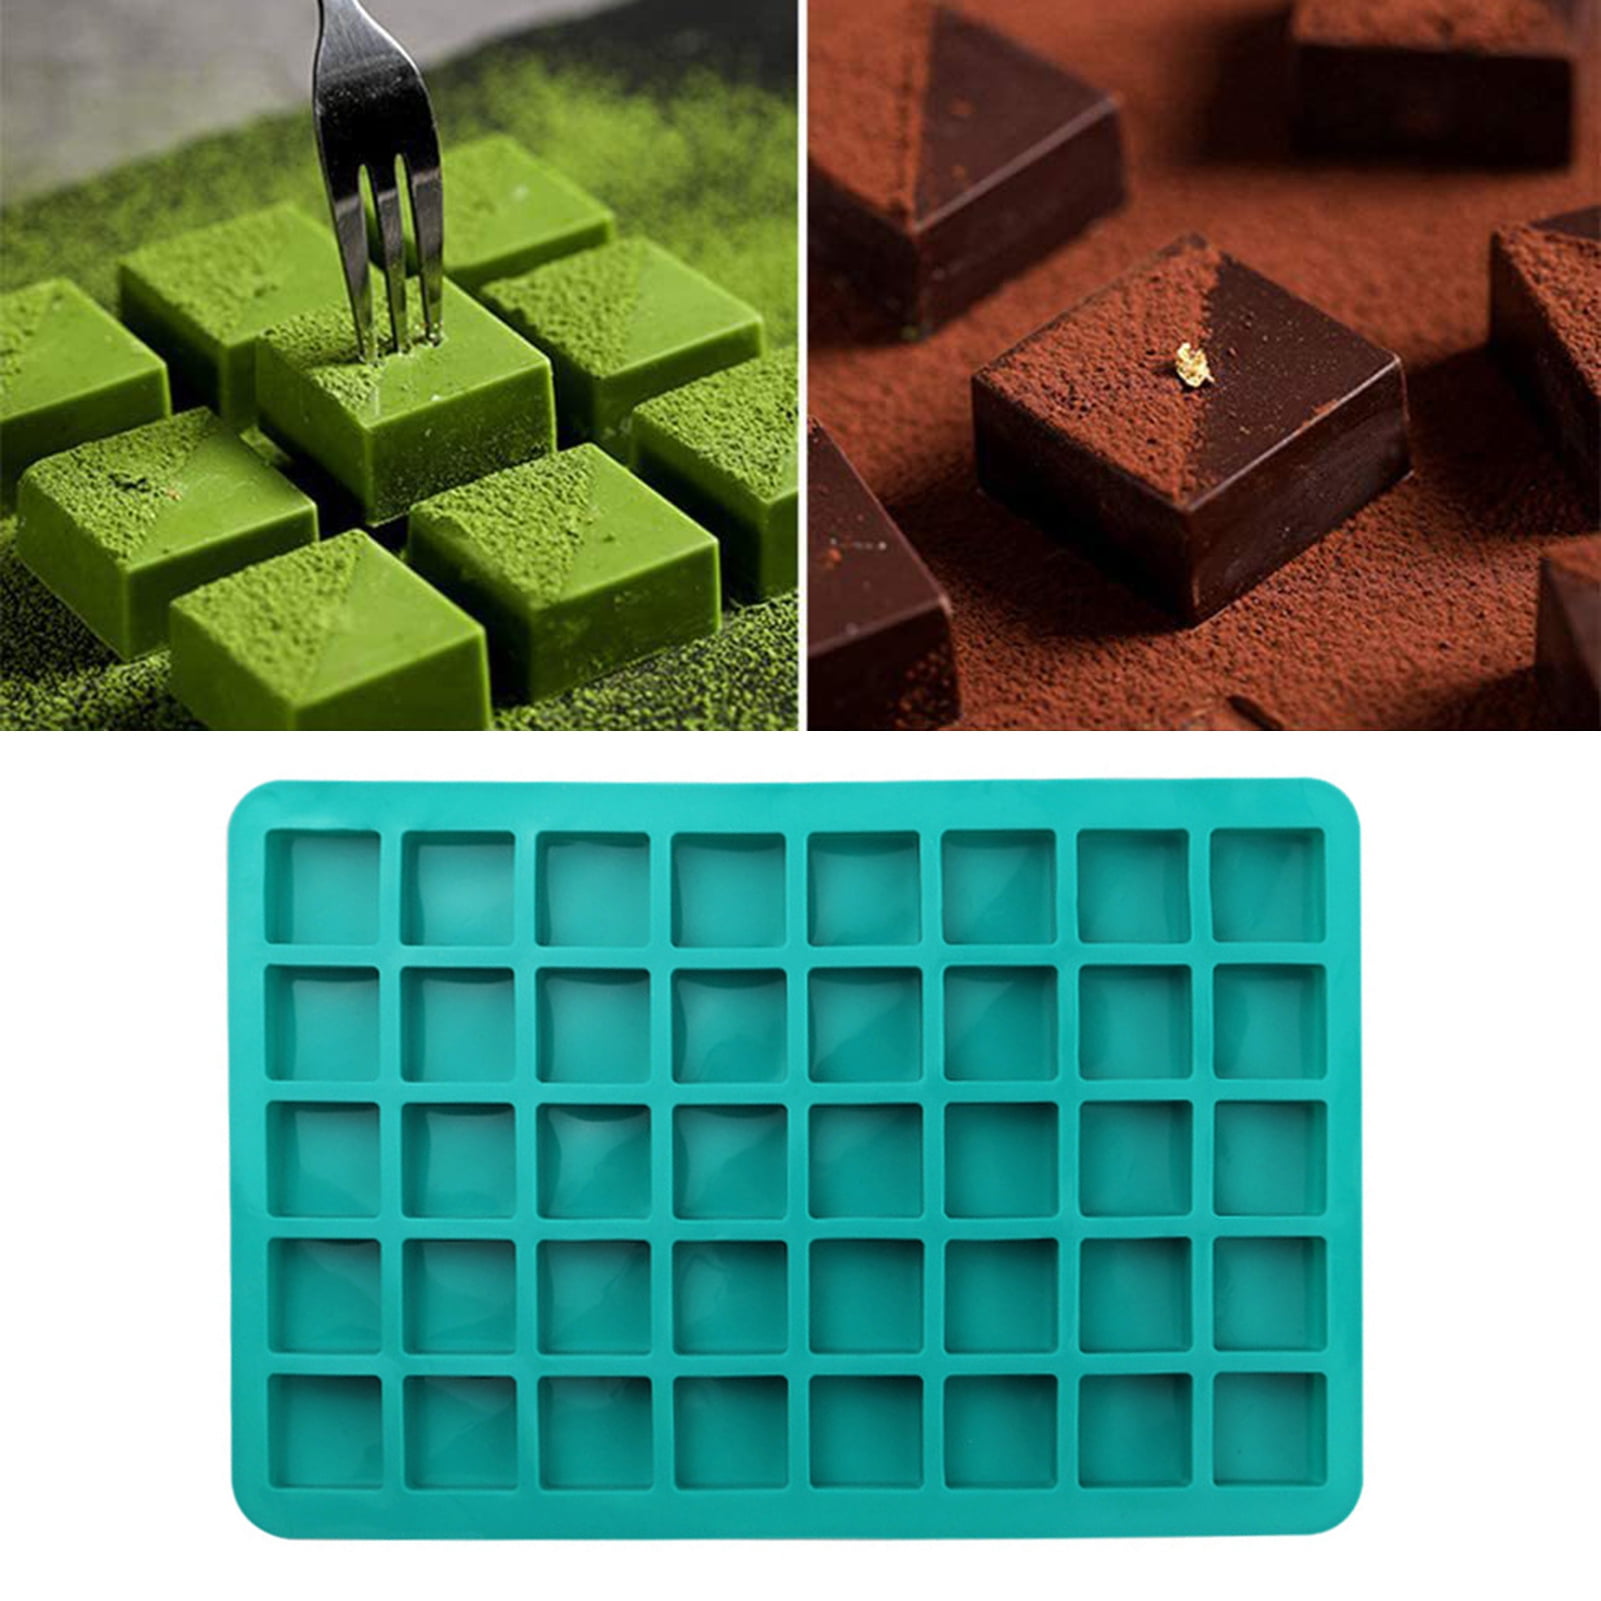 ionEgg 15 Cavities 1.4 inch Square Silicone Mold, Cube Mold for Making  Chocolate Candy, Cake, Ice Cube Tray, Truffles Pralines, Pack of 2